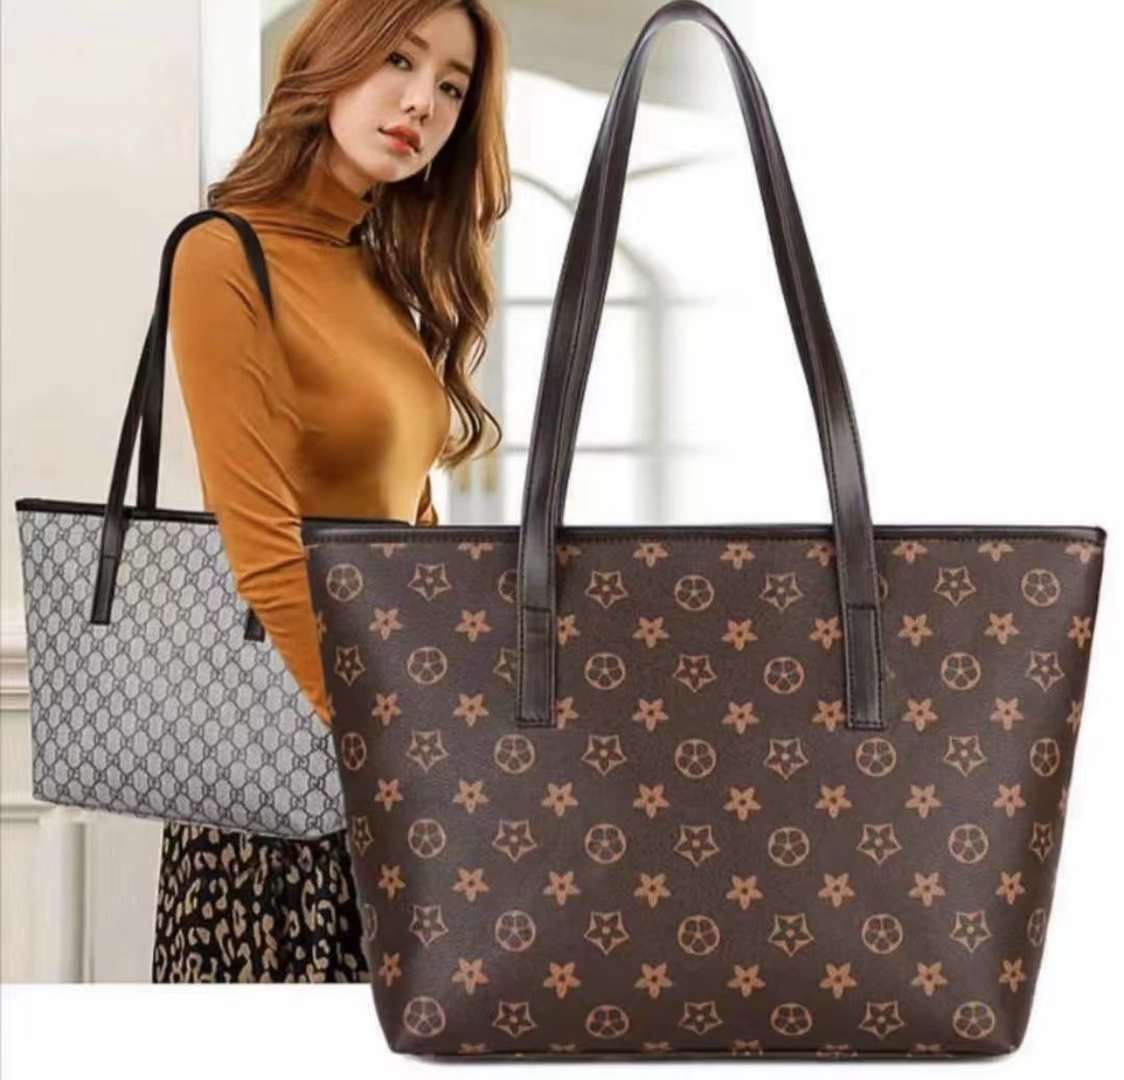 Buy For monogram Canvas Luco Tote Bag Bag Insert Online in India 